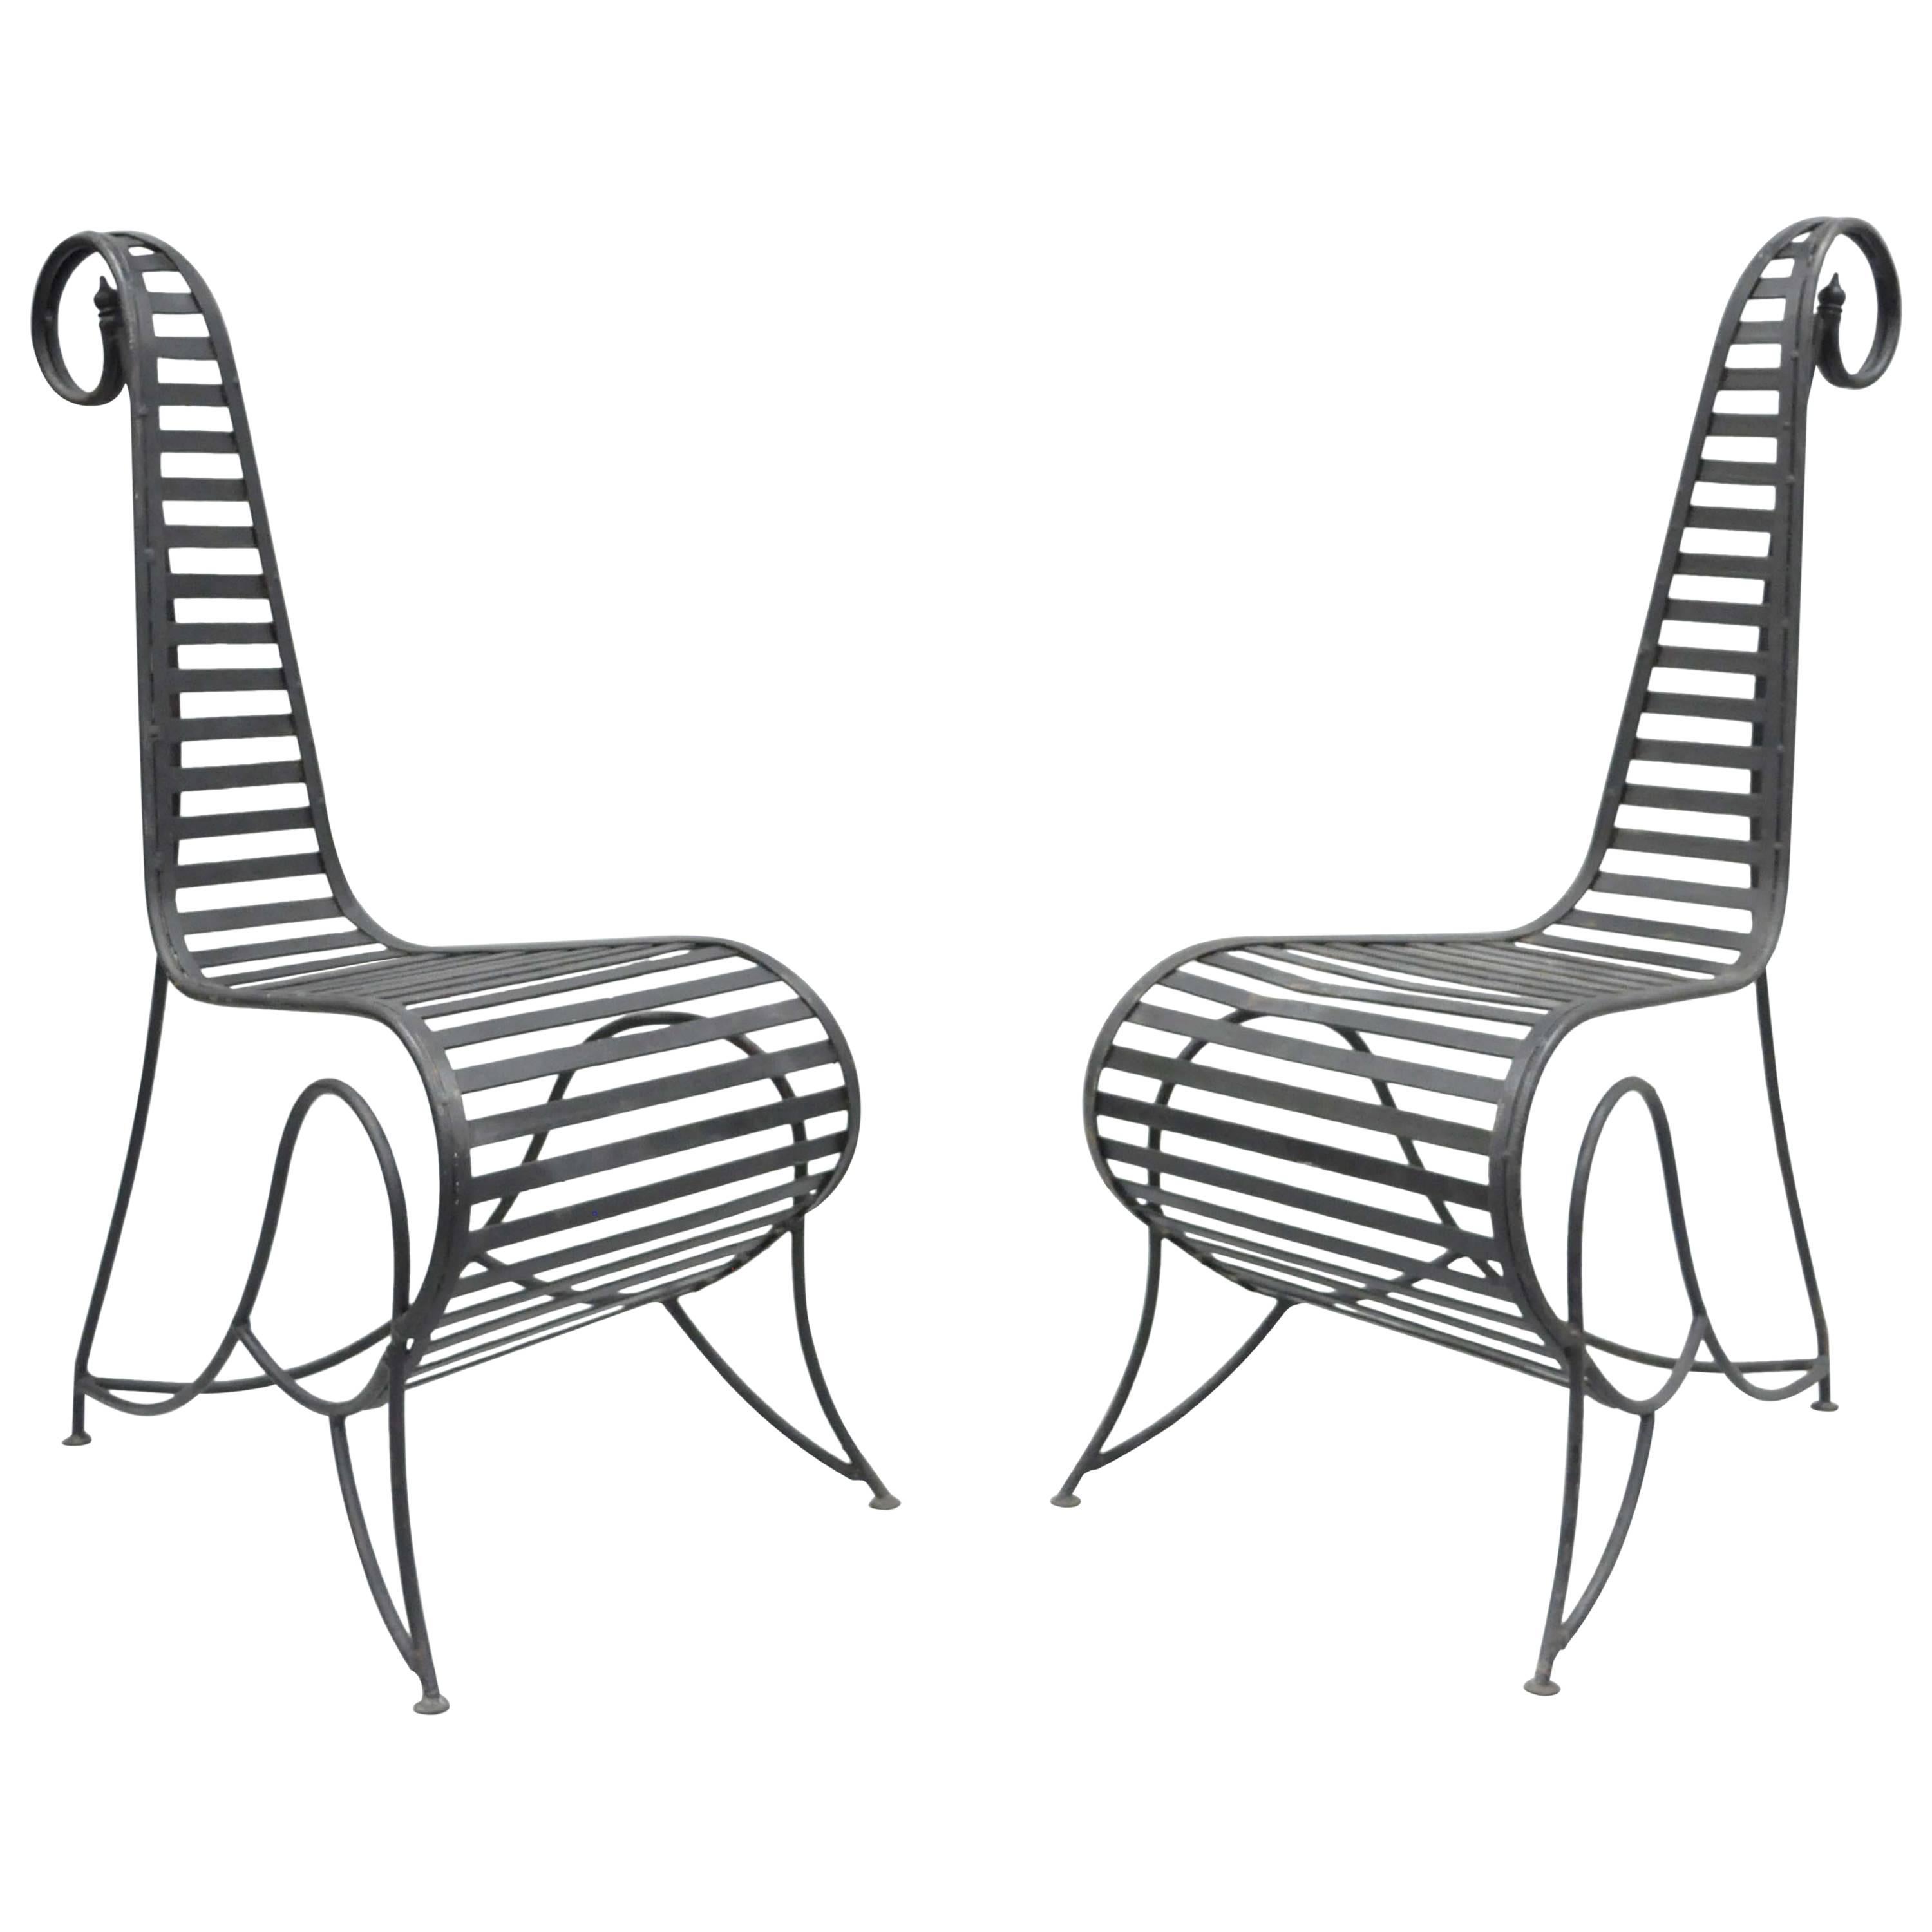 Pair of Vintage Whimsical Steel Iron Spine Lounge Chairs after André Dubreuil